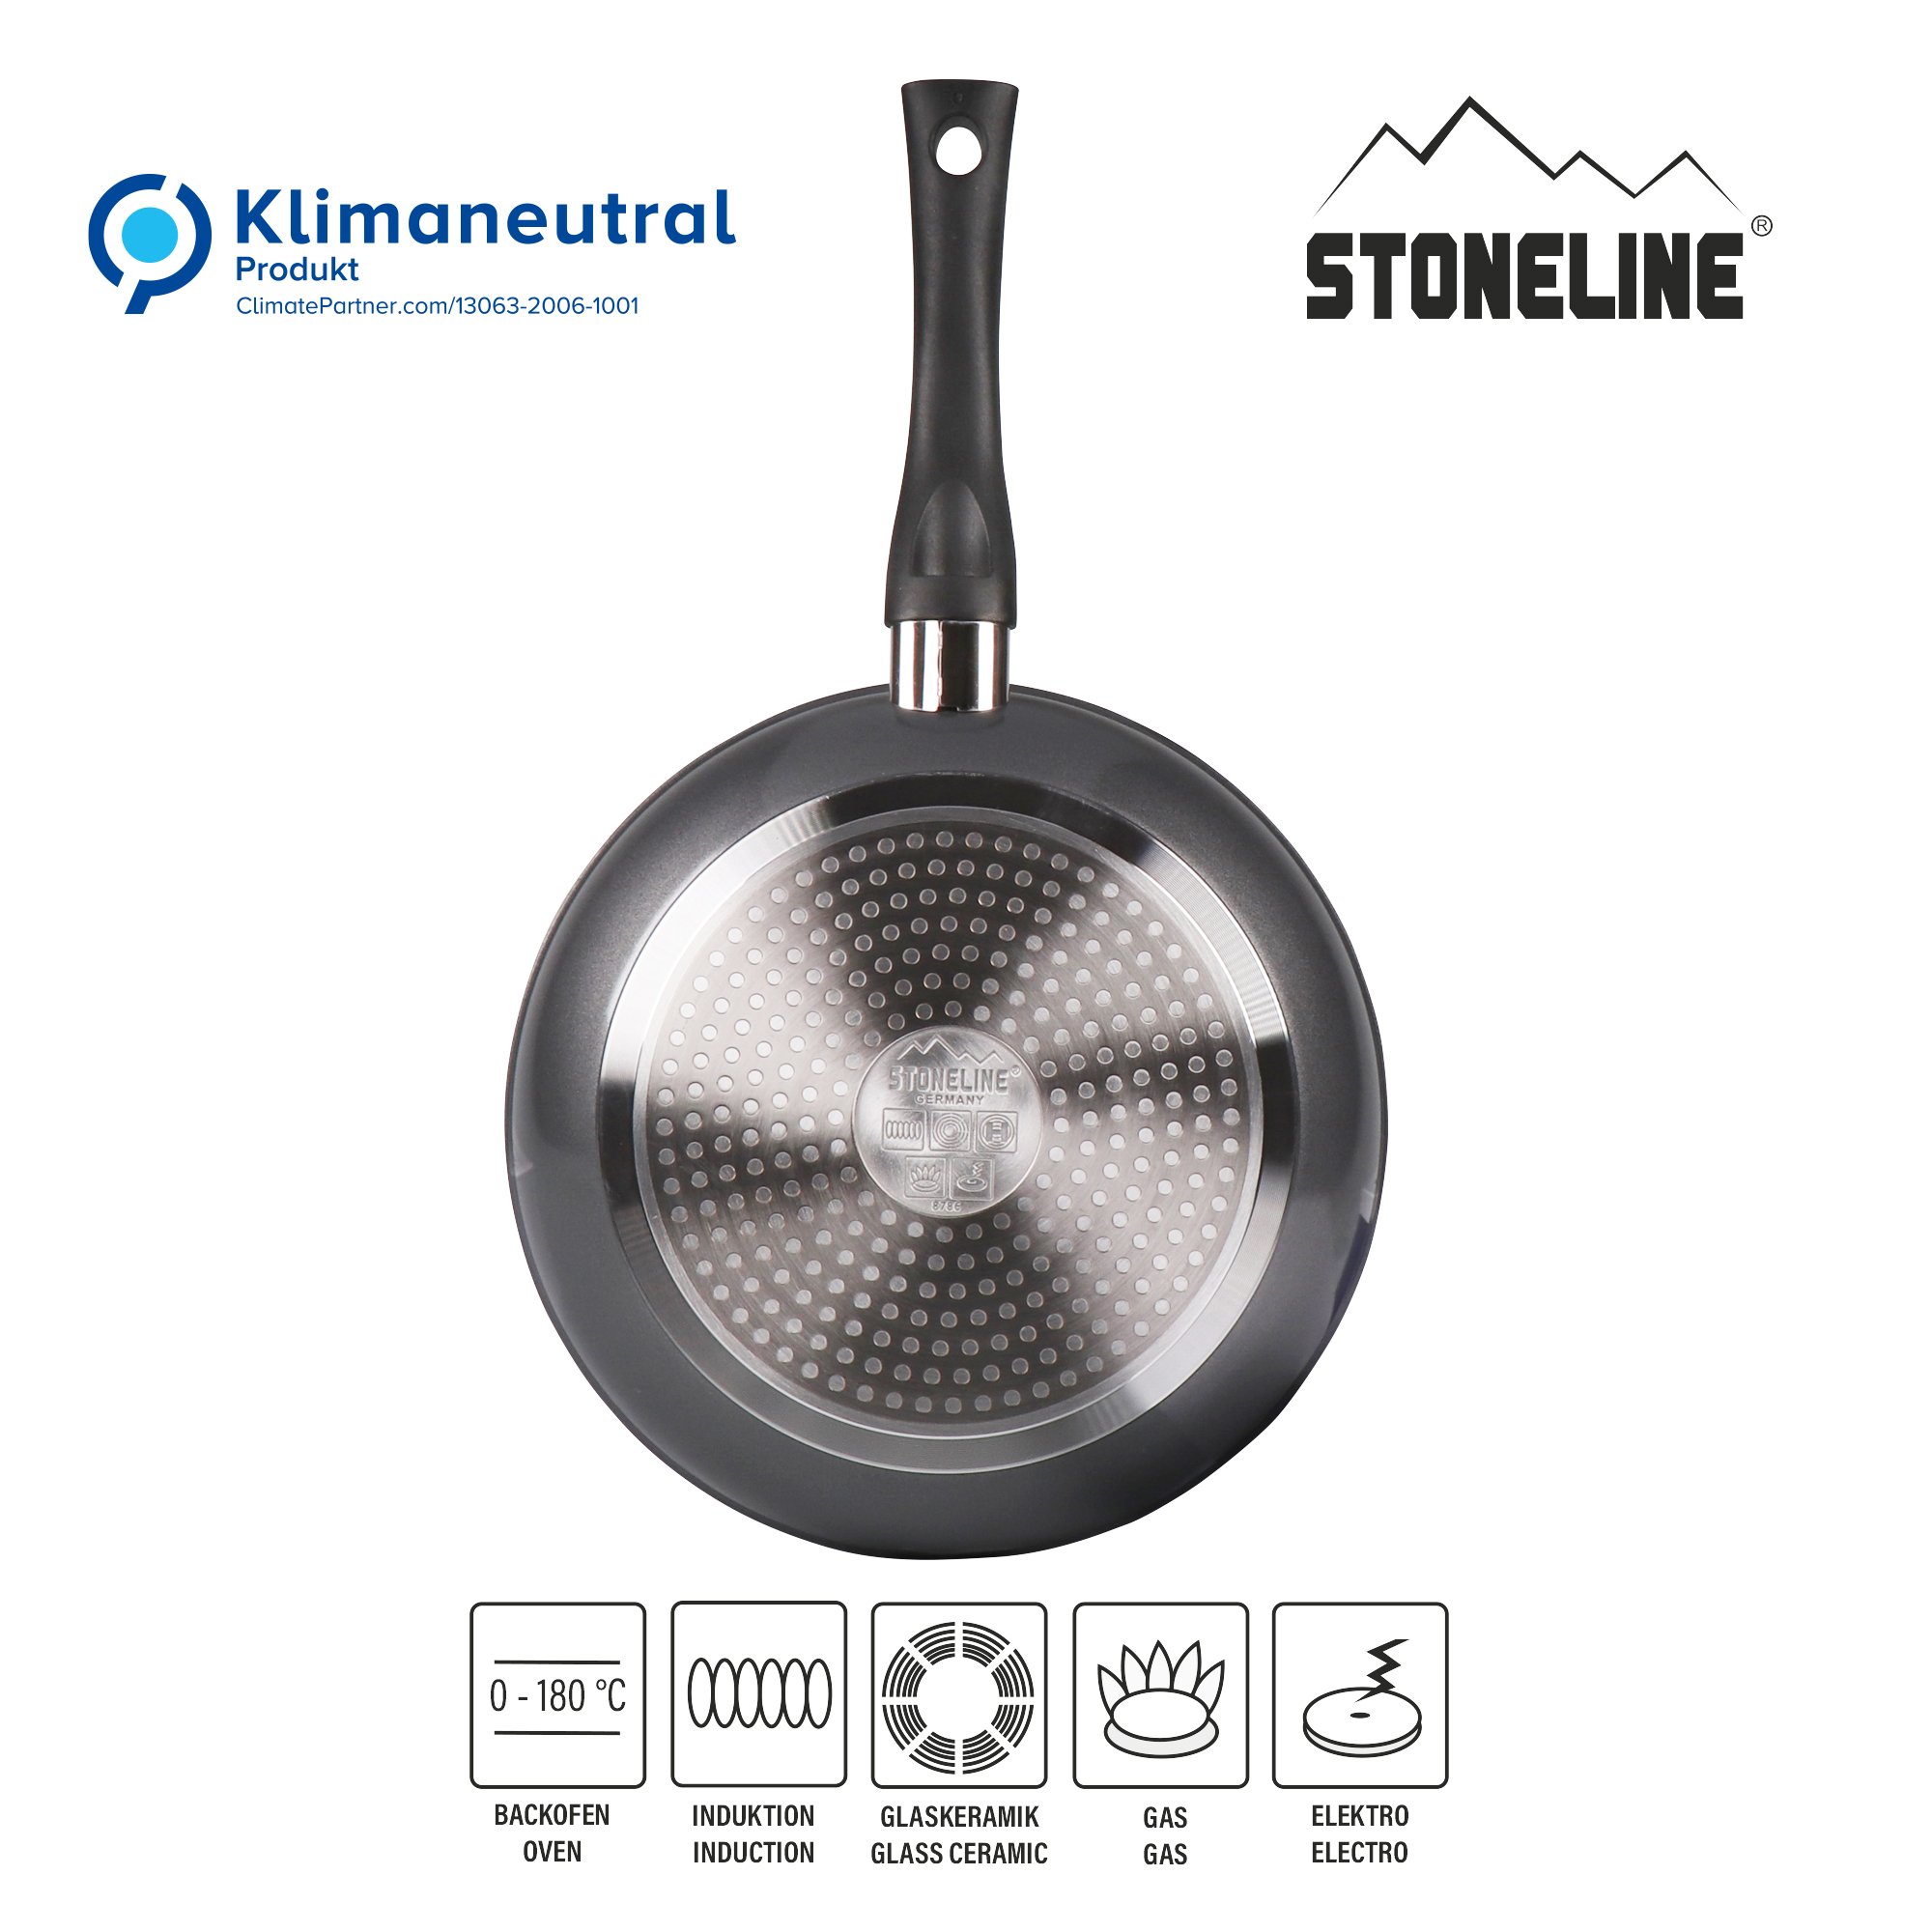 STONELINE® Primo frying pan 24 cm, non-stick coated pan, induction and oven-safe